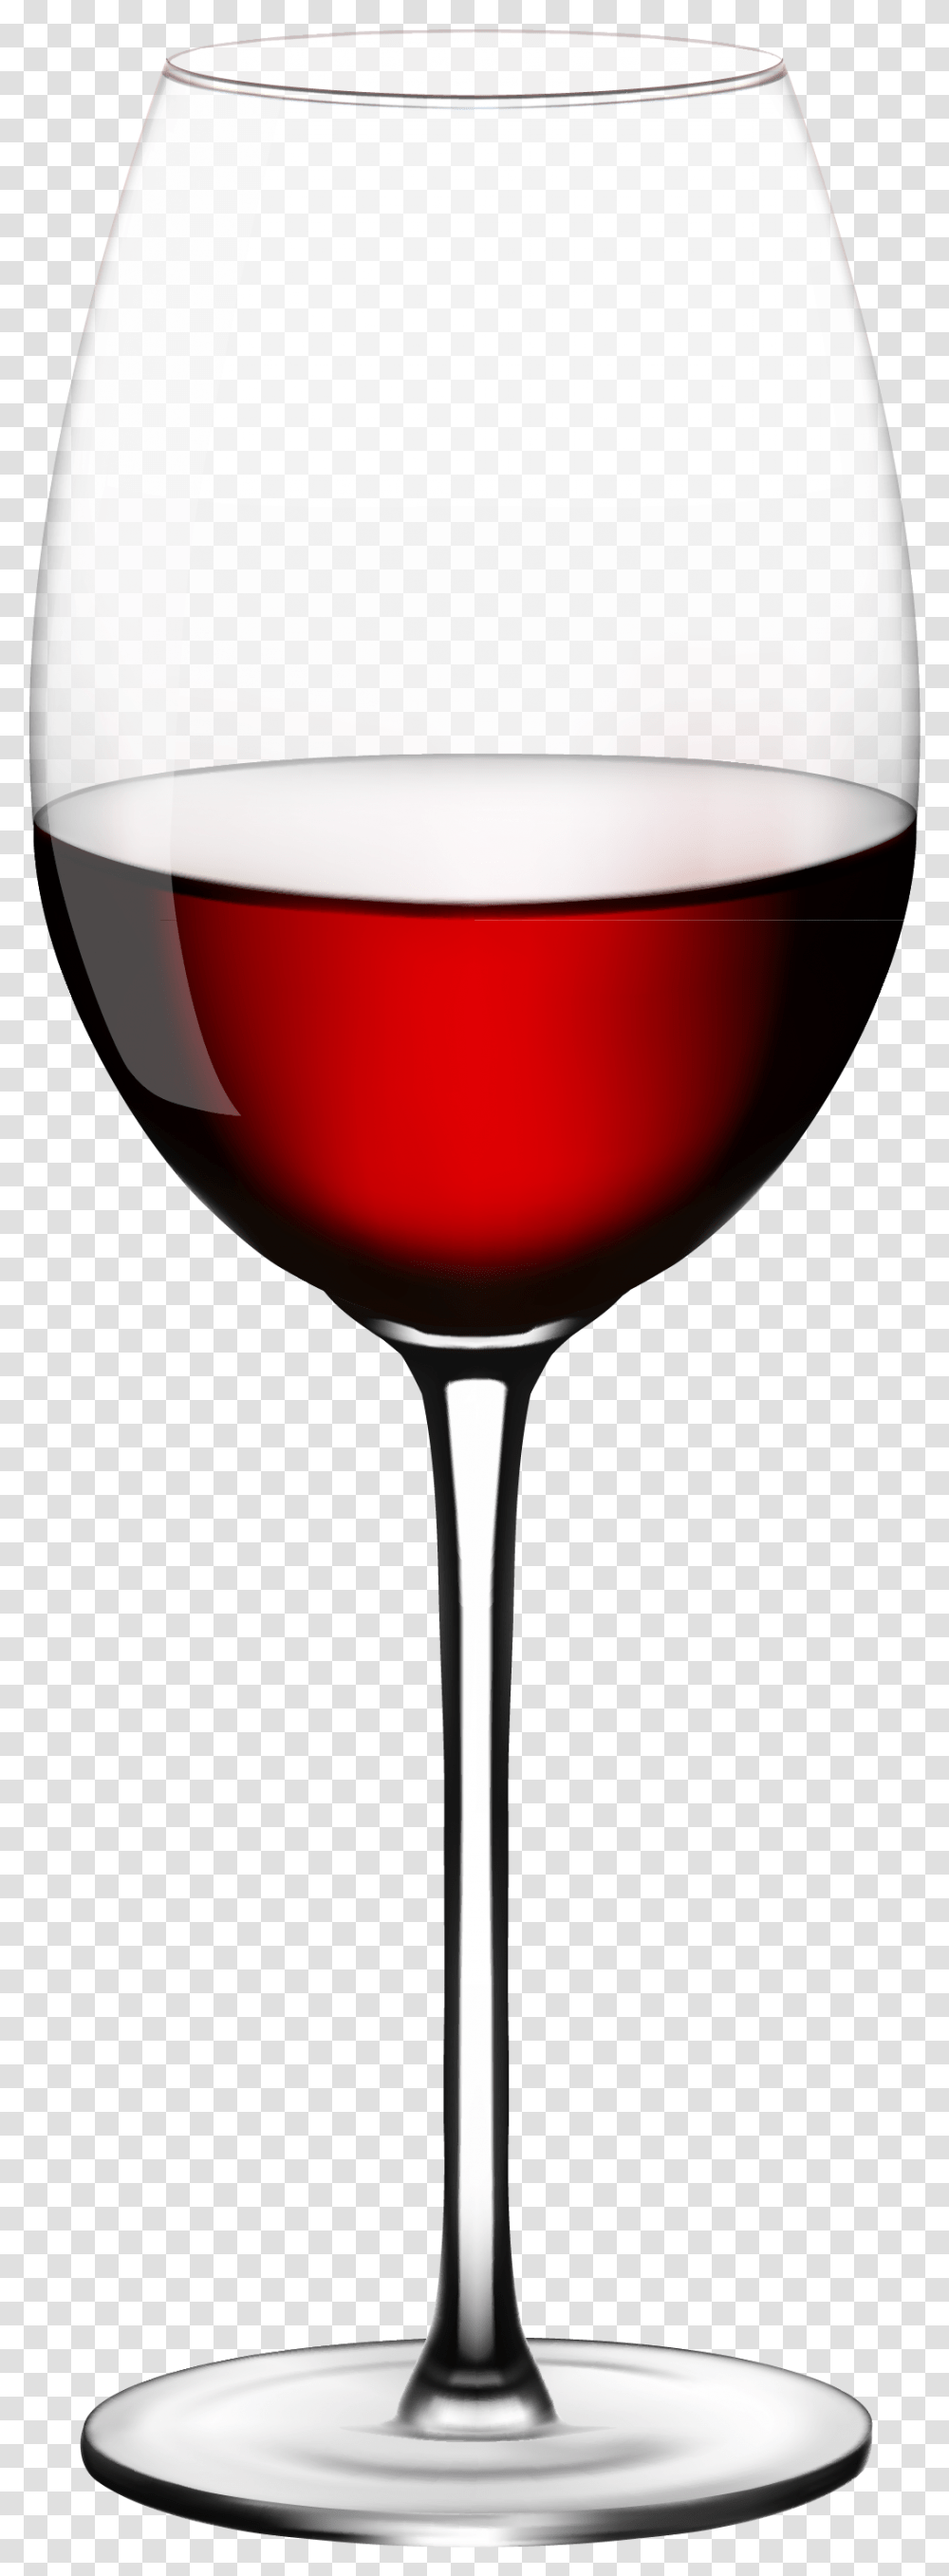 Wine Glasses Clipart Background Wine Glass, Lamp, Alcohol, Beverage, Drink Transparent Png